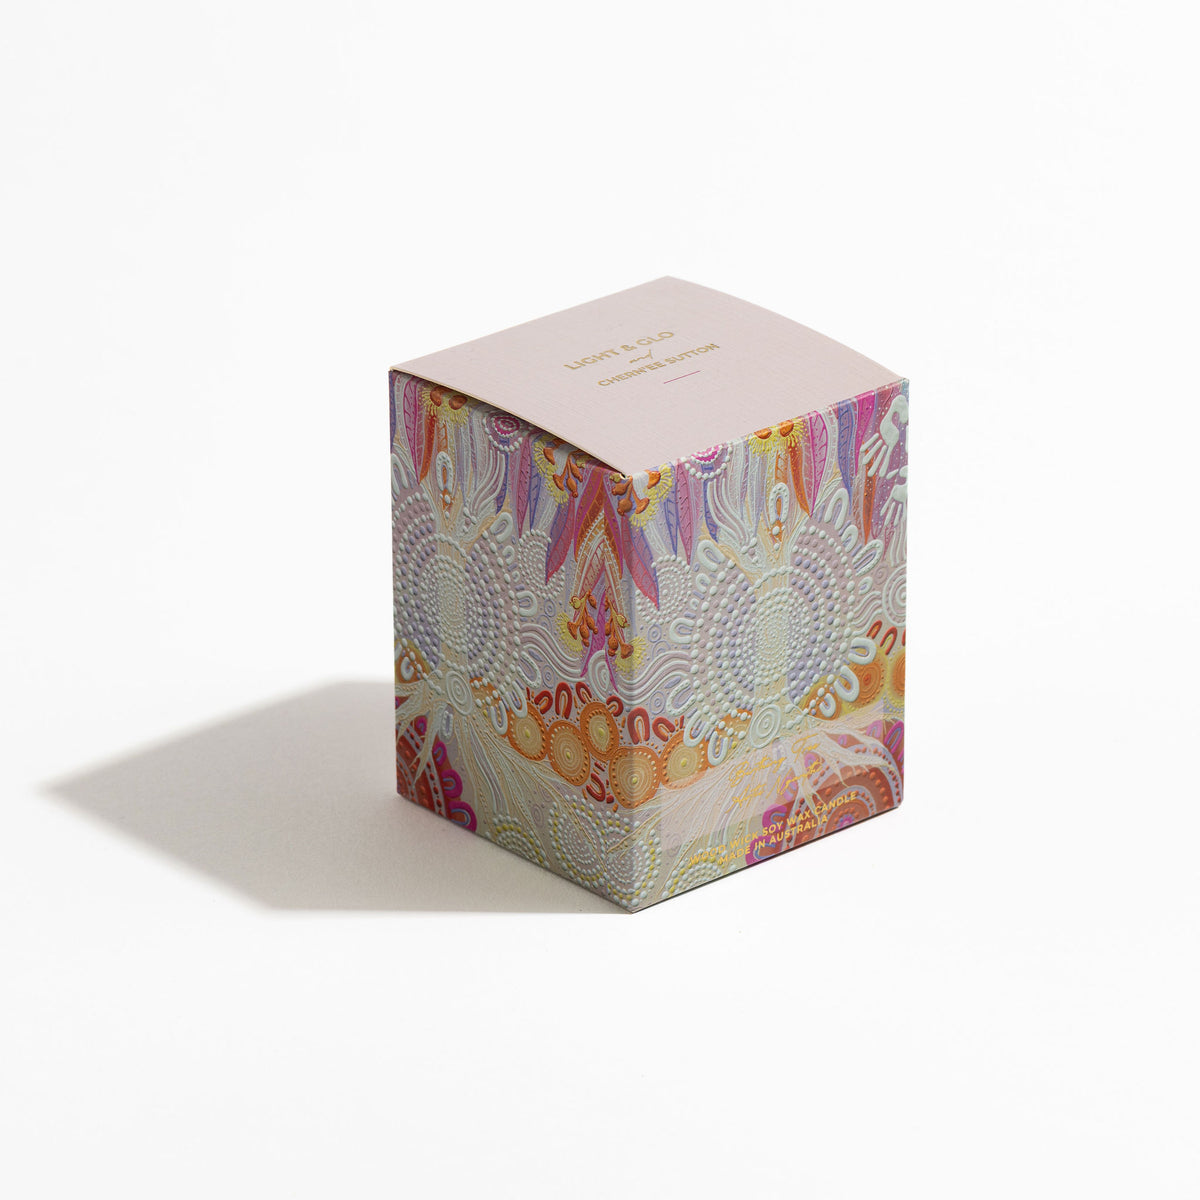 Light + Glo x Cher&#39;nee Sutton - Birthing Tree | Luxury Candles &amp; Home Fragrances by Light + Glo